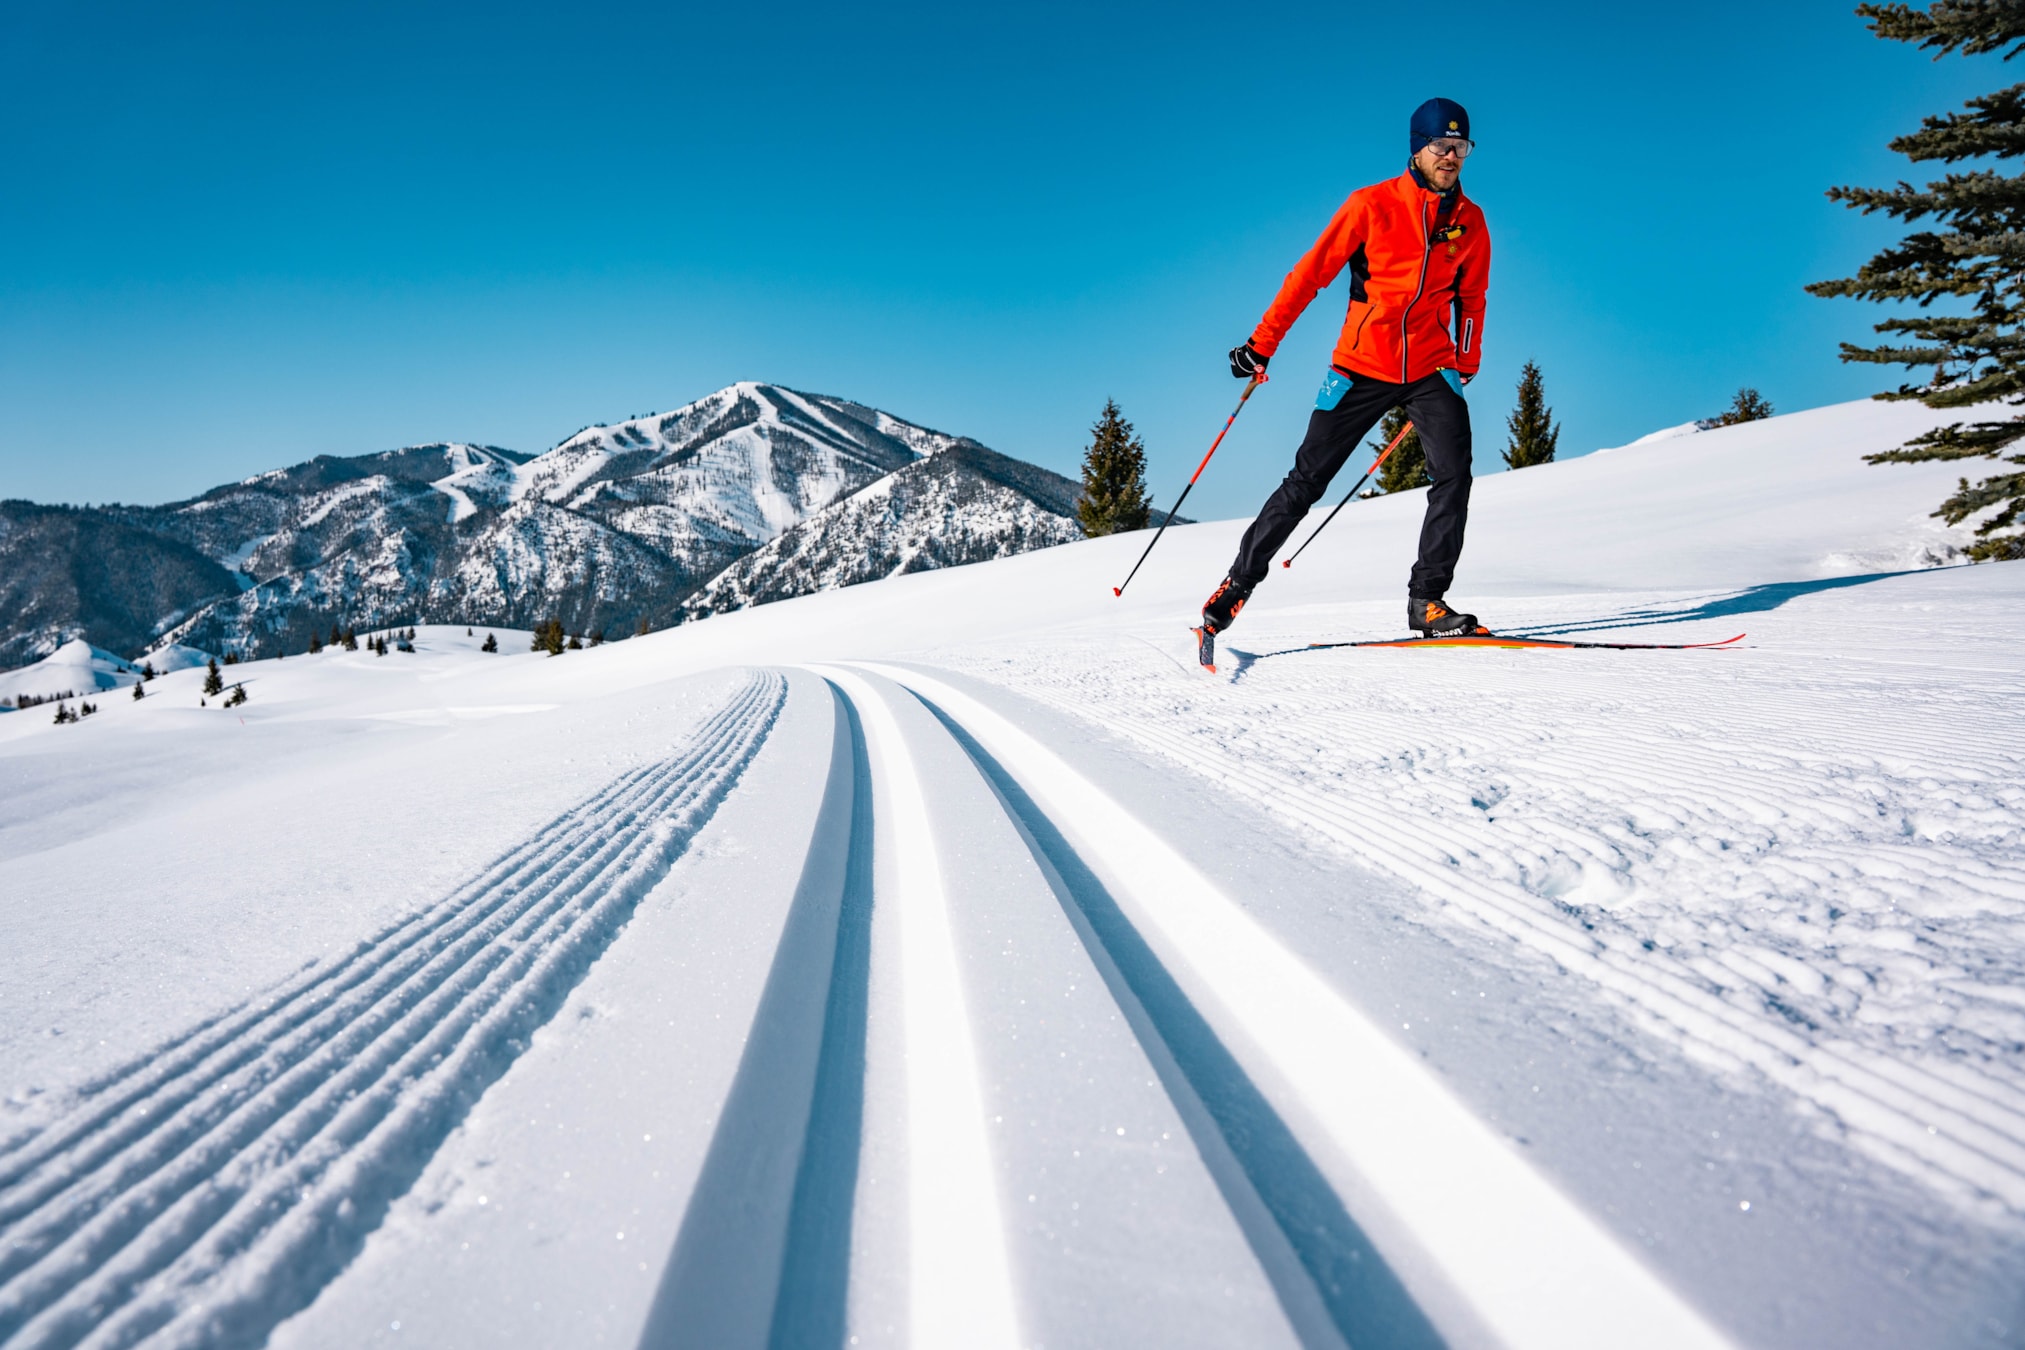 The Ski Haus Nordic Skier's Gift Guide For The Holidays - Ski Haus